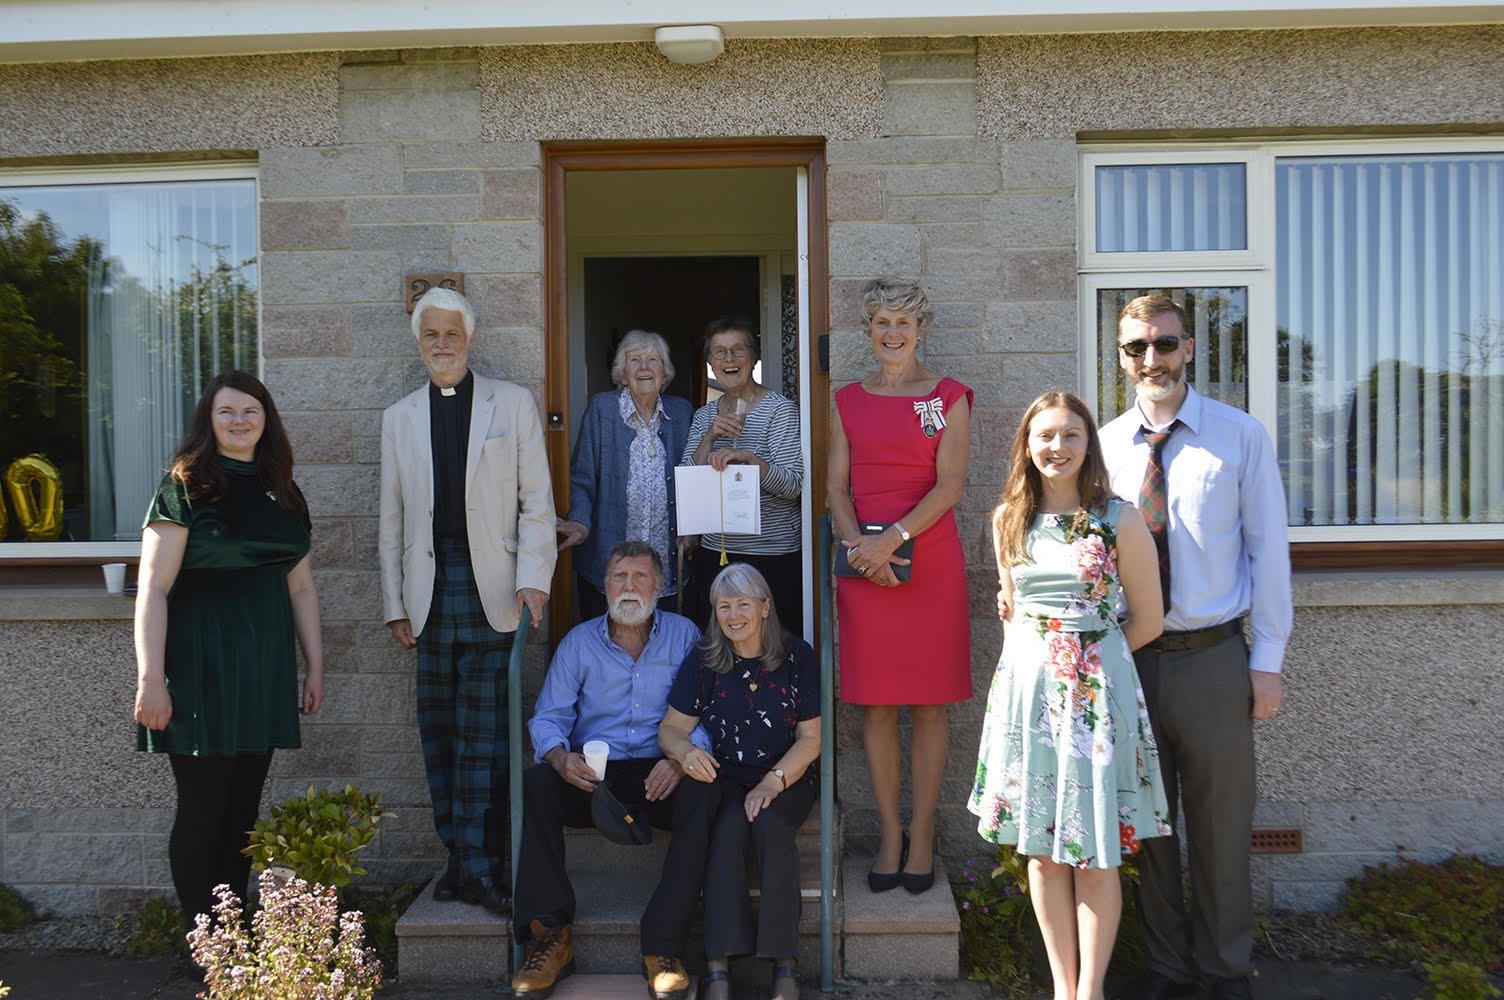 Jenny Rae (granddaughter), Rev James Currall Scottish Episcopal Church, Barbara Rae, Pat Rae (daughter, holding Royal card), Joanie Whiteford, Heather Cochrane (granddaughter) and Euan Cochrane. Front Ian Rae (son) and Jane Rae.